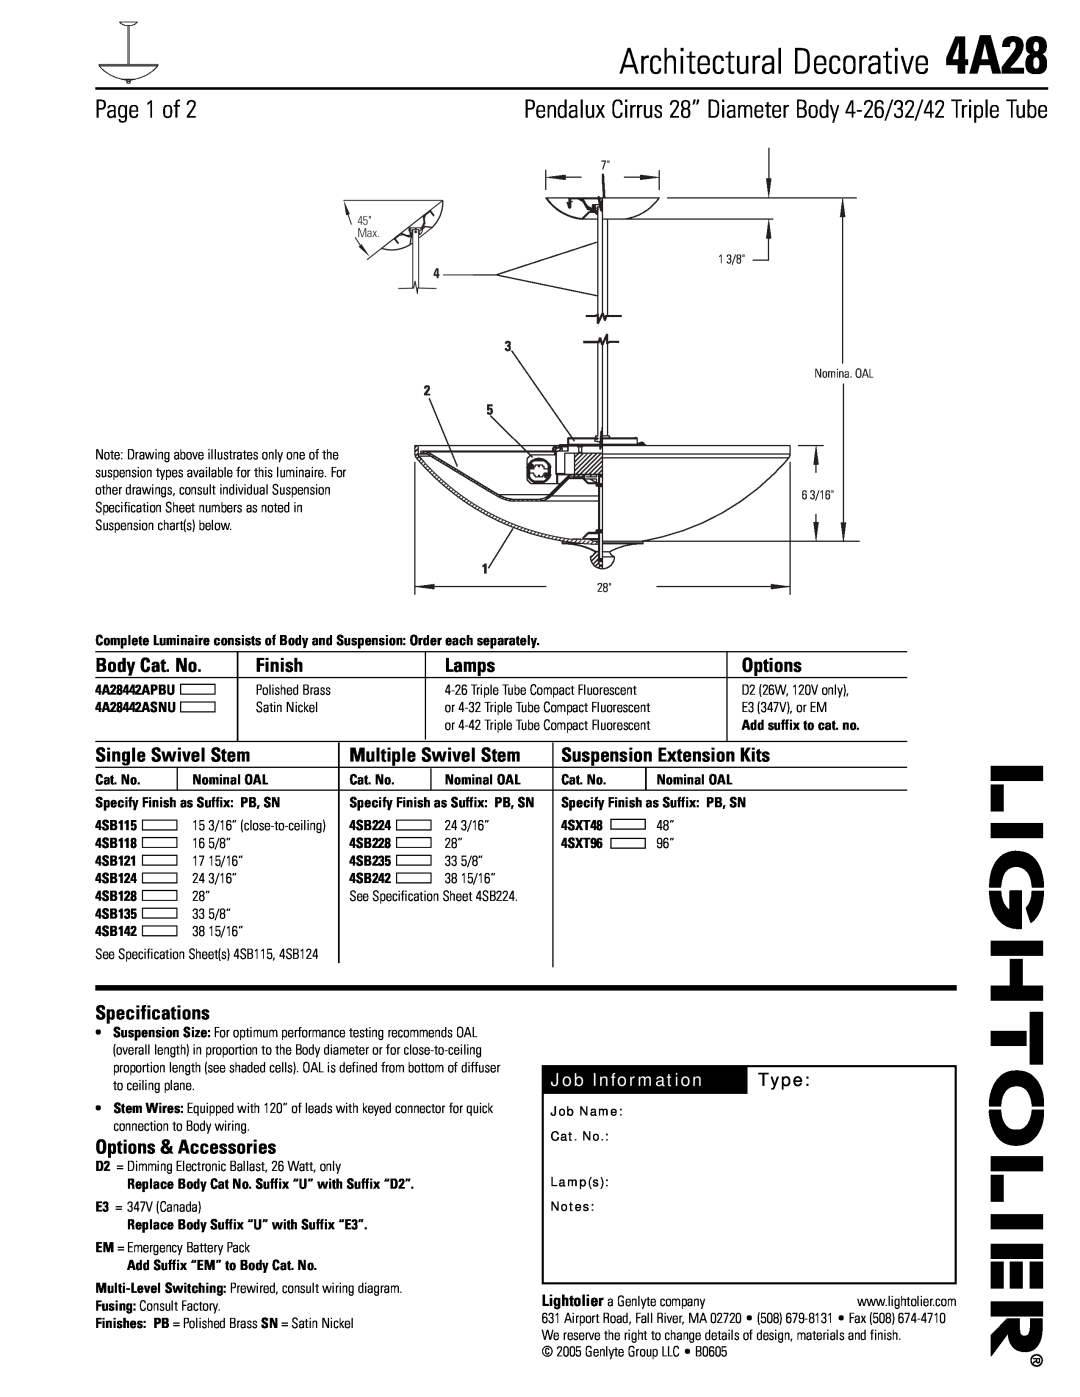 Lightolier specifications Architectural Decorative 4A28, Page 1 of, Finish, Lamps, Options, Single Swivel Stem, Type 